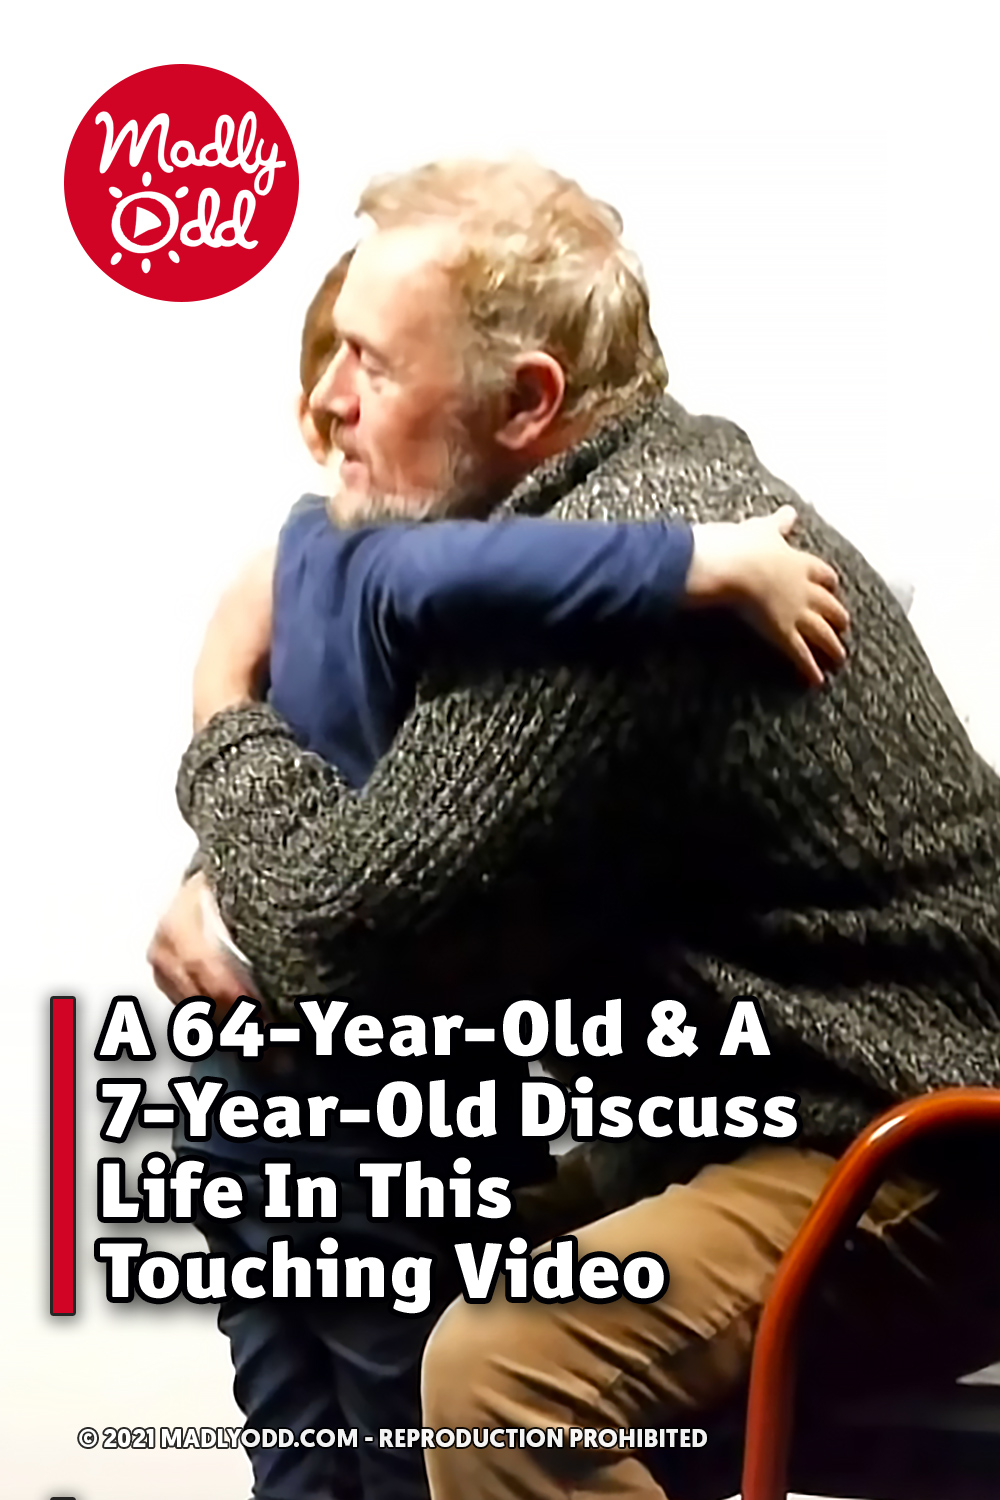 A 64-Year-Old & A 7-Year-Old Discuss Life In This Touching Video